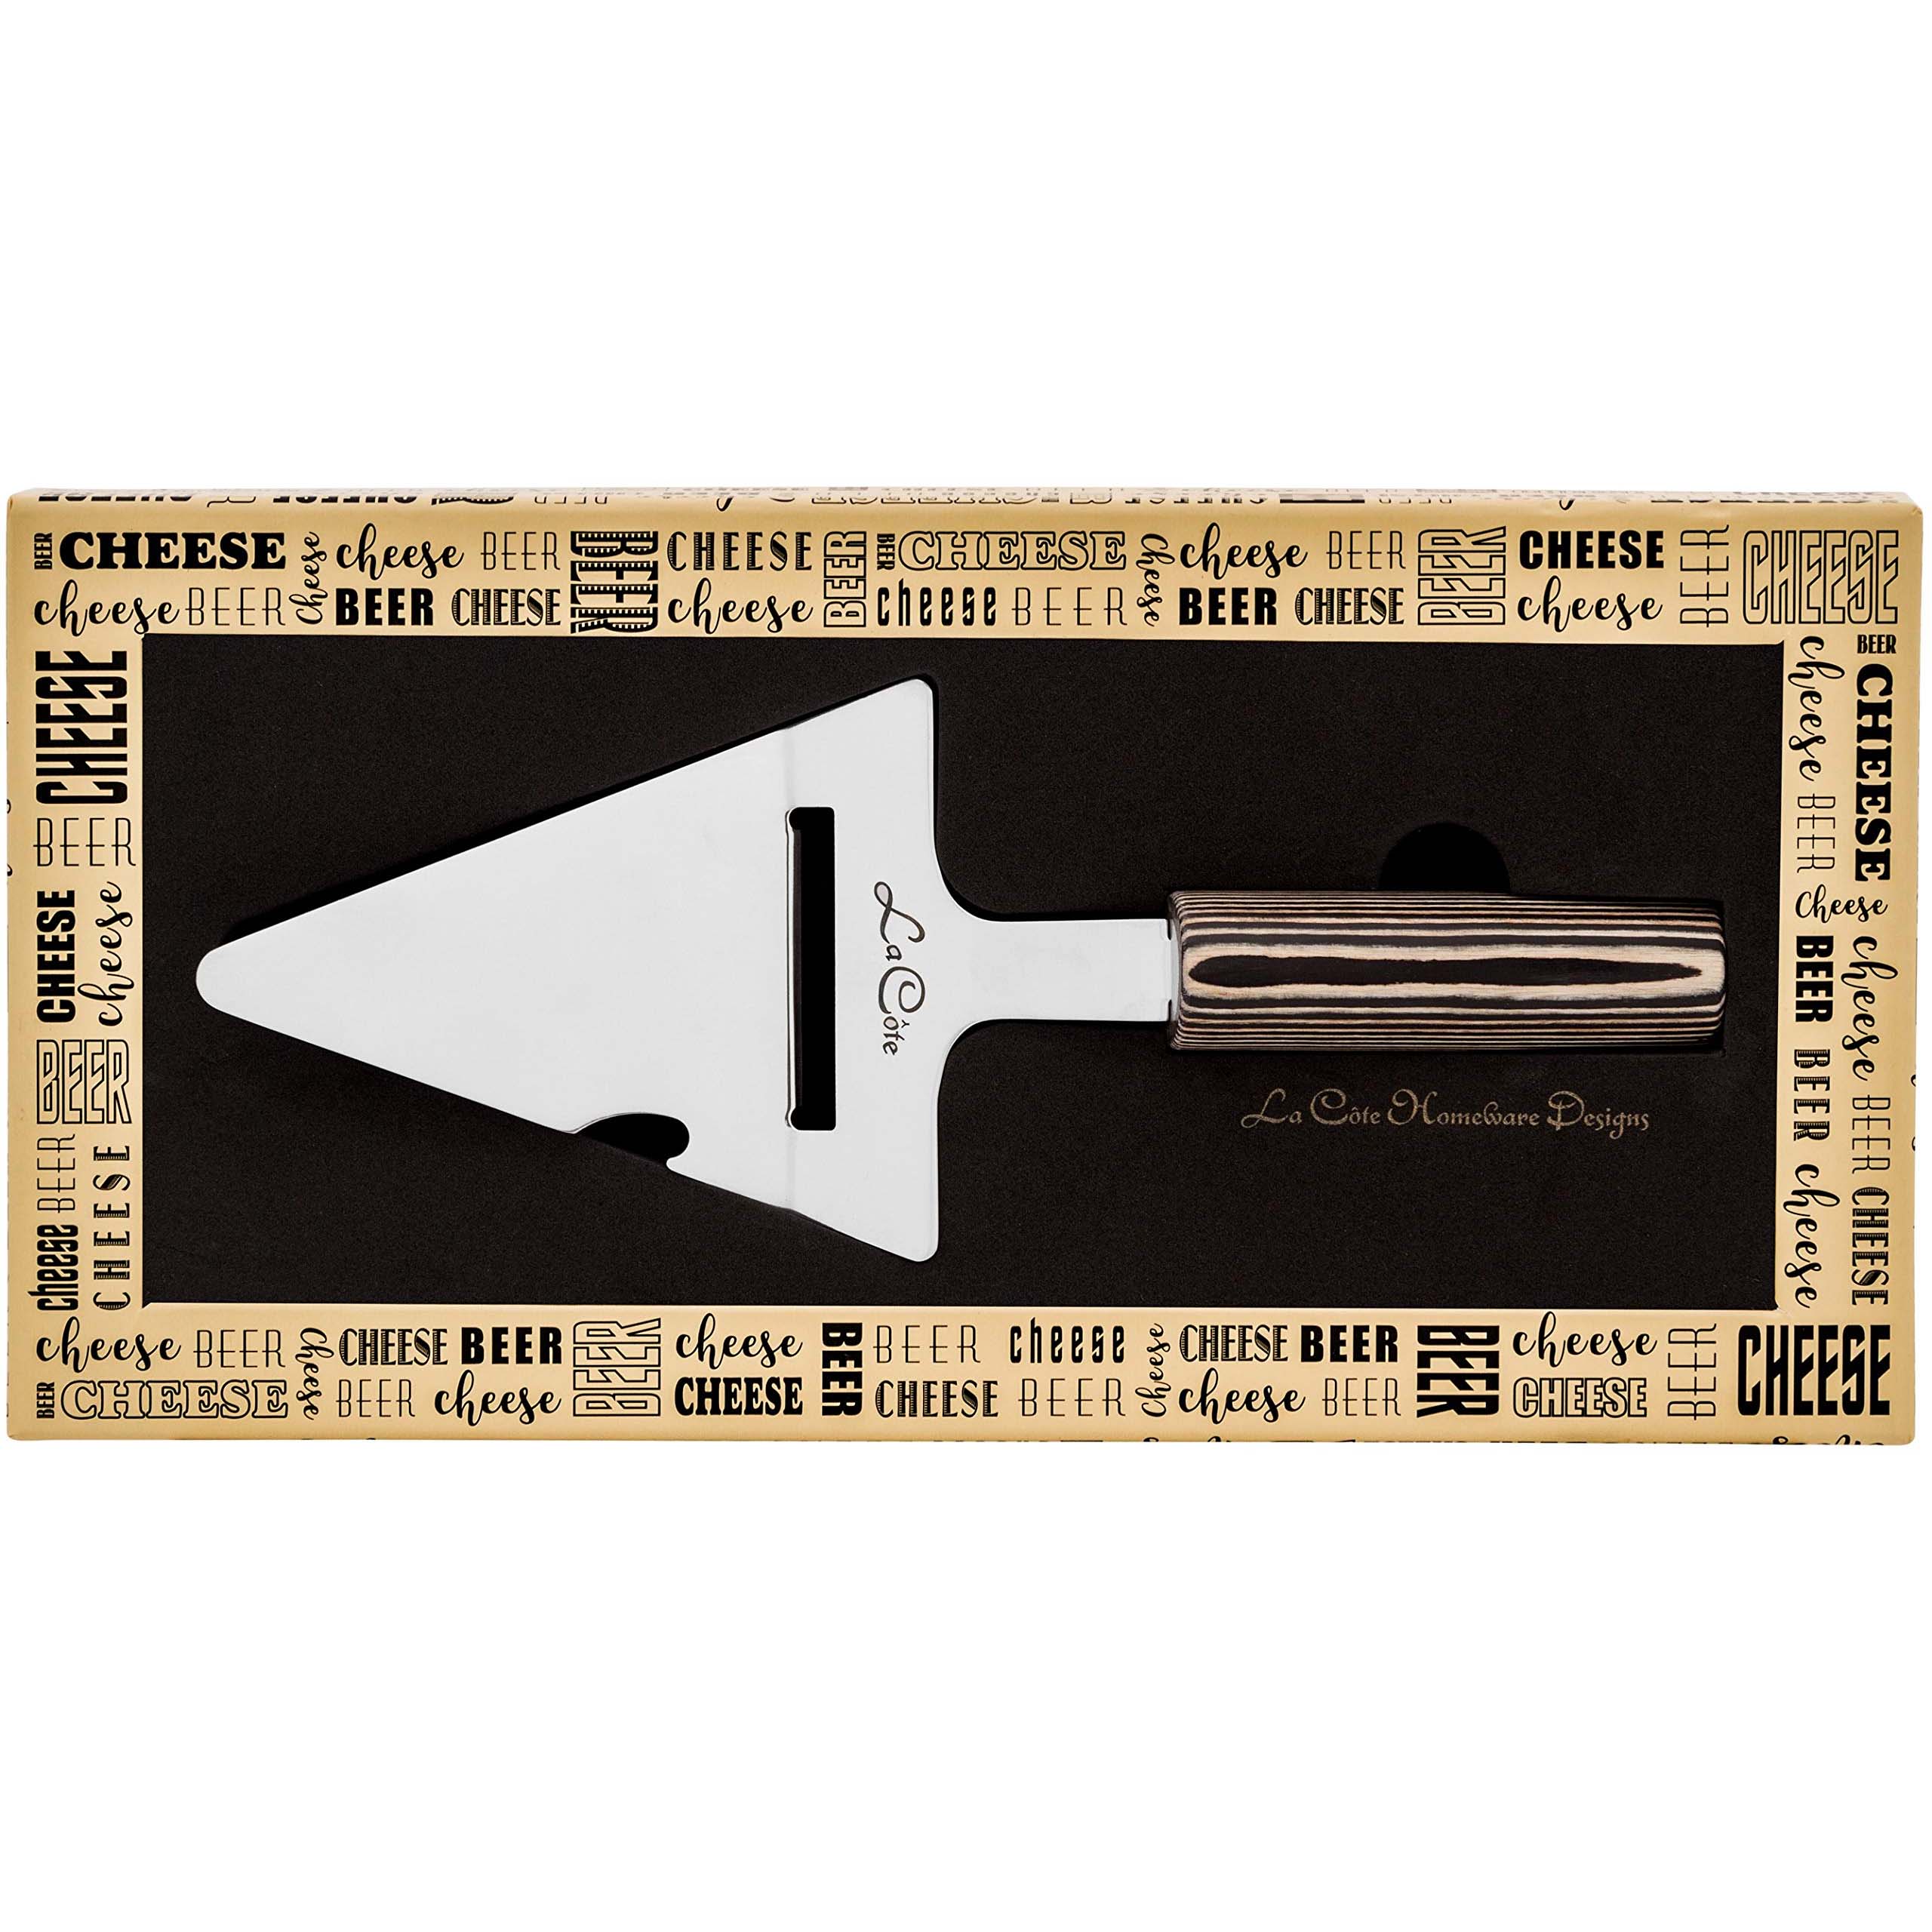 La Cote Stainless Steel Cheese Plane Slicer Knife With Pakka Wood Handle in Gift Box (Cheese Plane 10 Inch)